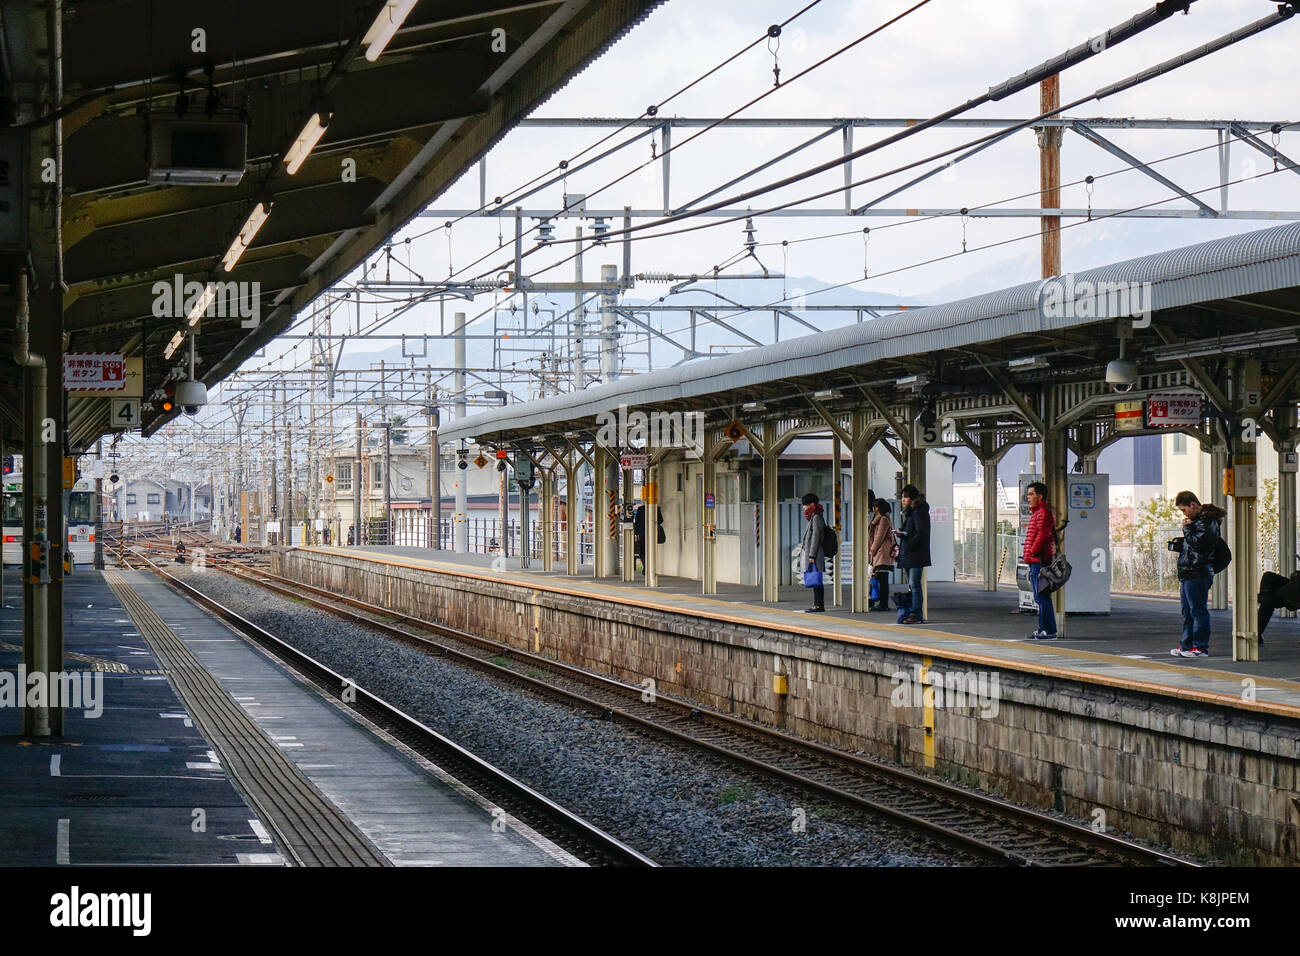 Tokyo, Japan - Dec 25, 2015. People waiting for the train at Hachioji railway station in Tokyo, Japan. Railways are the most important means of passen Stock Photo